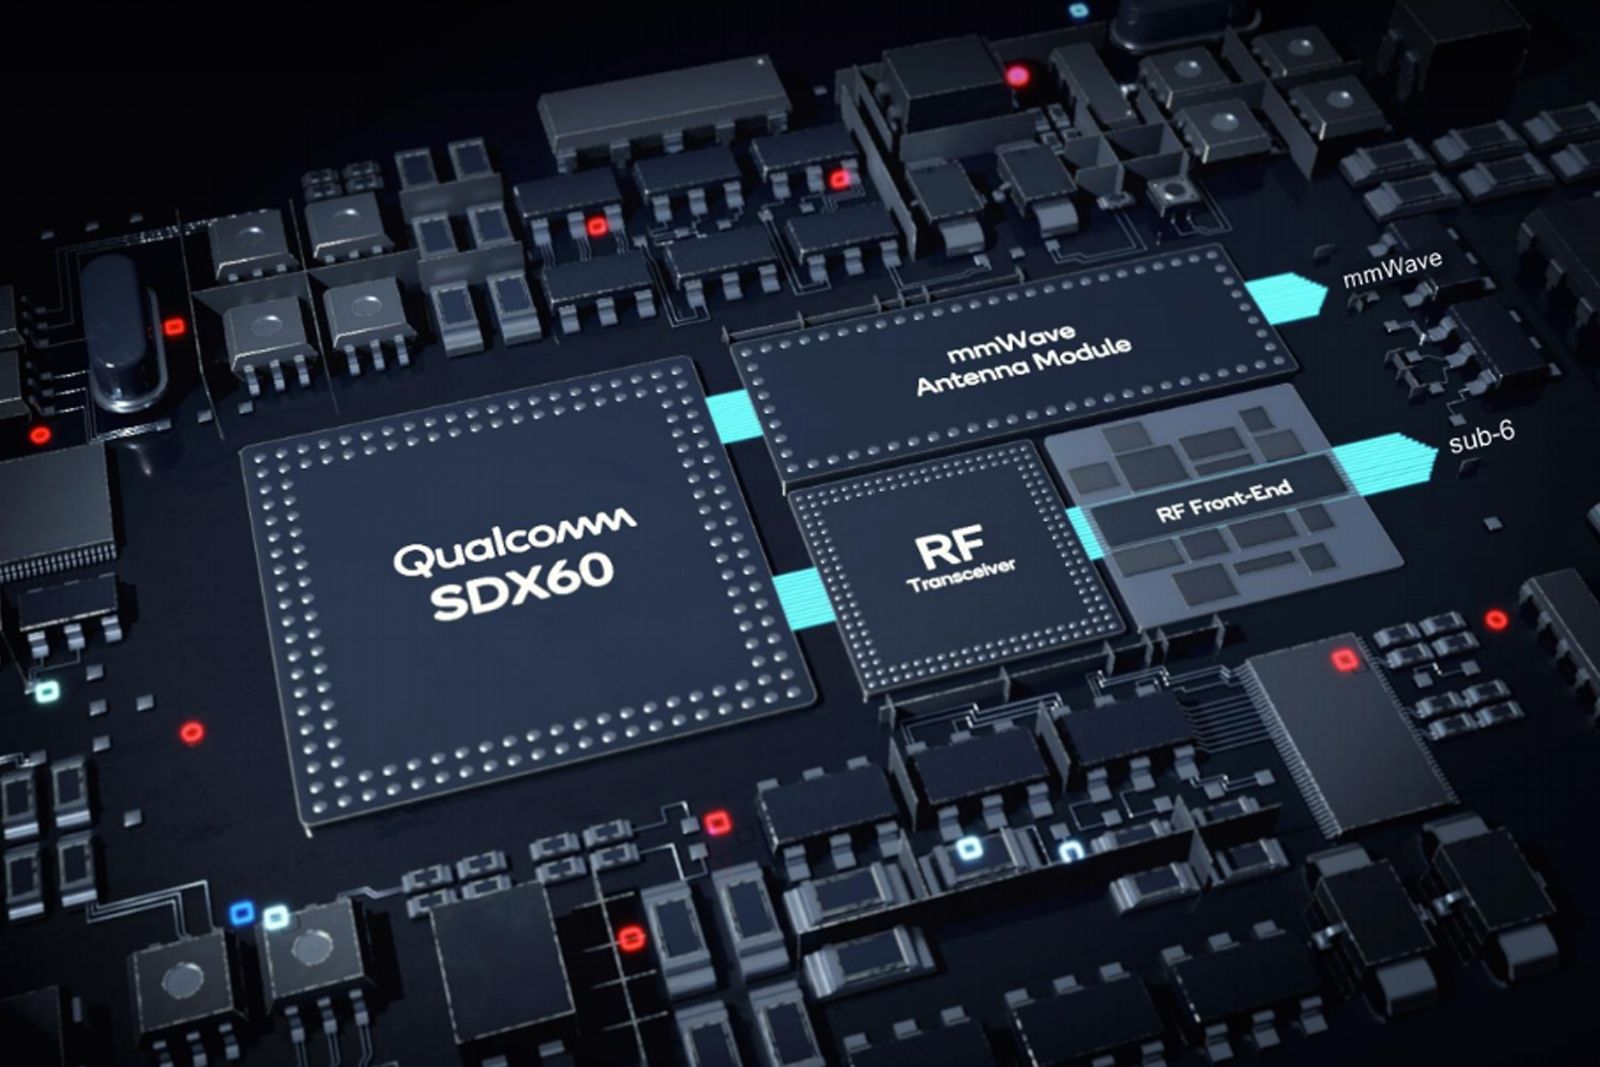 Qualcomm powers up 5G with the X60 modem - will it be inside the iPhone 5G image 1